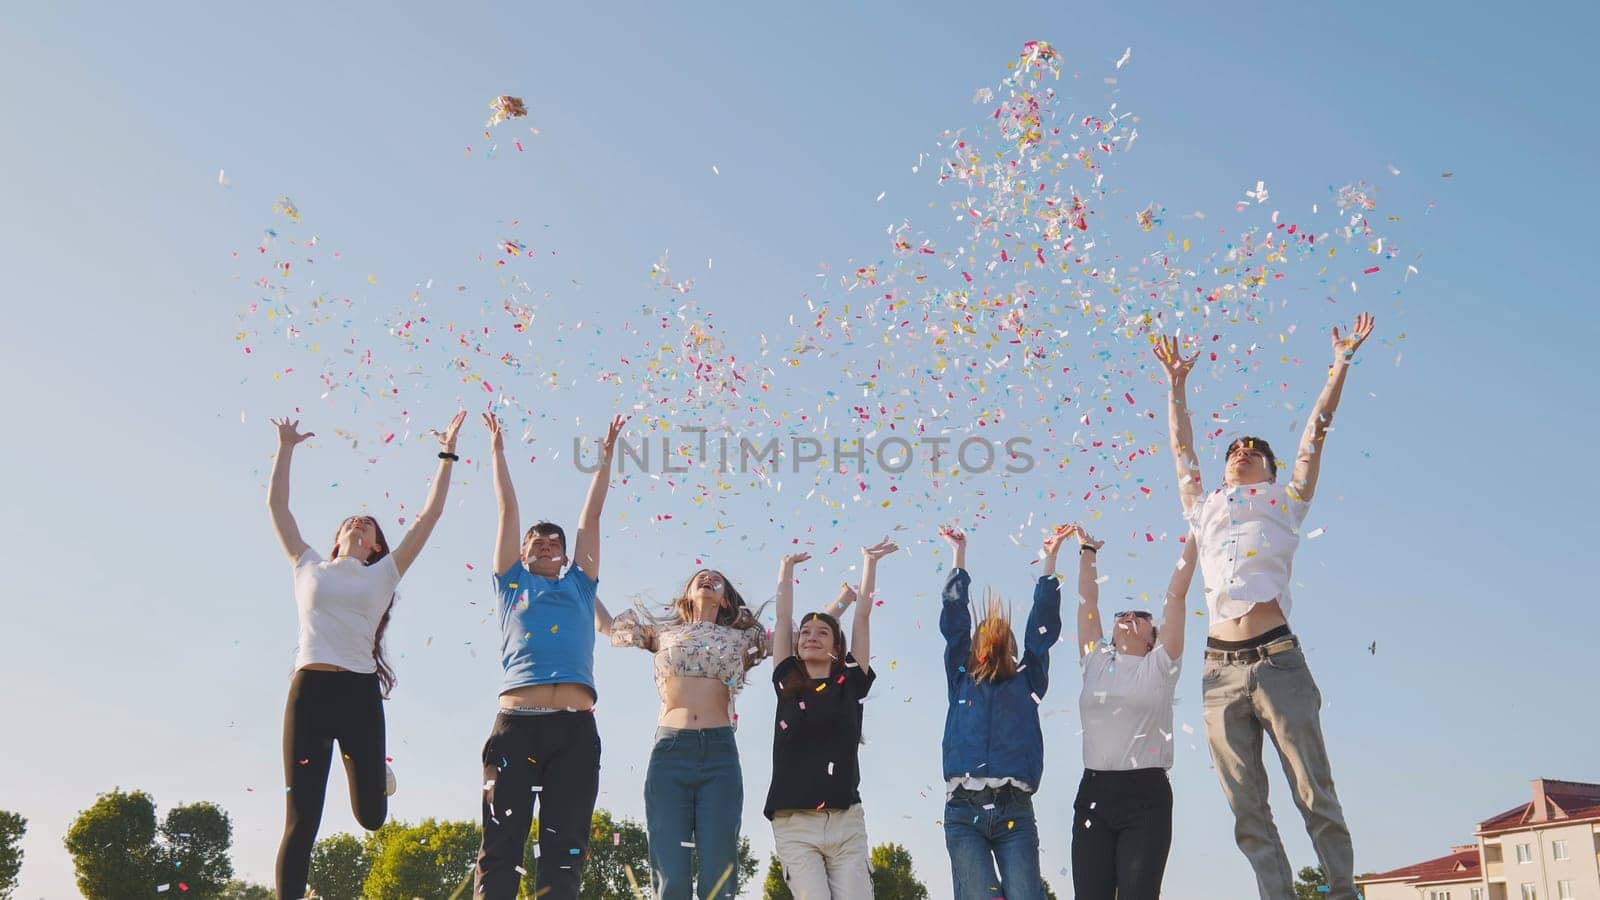 Party, holidays, new year and celebration concept - Female child throwing confetti.